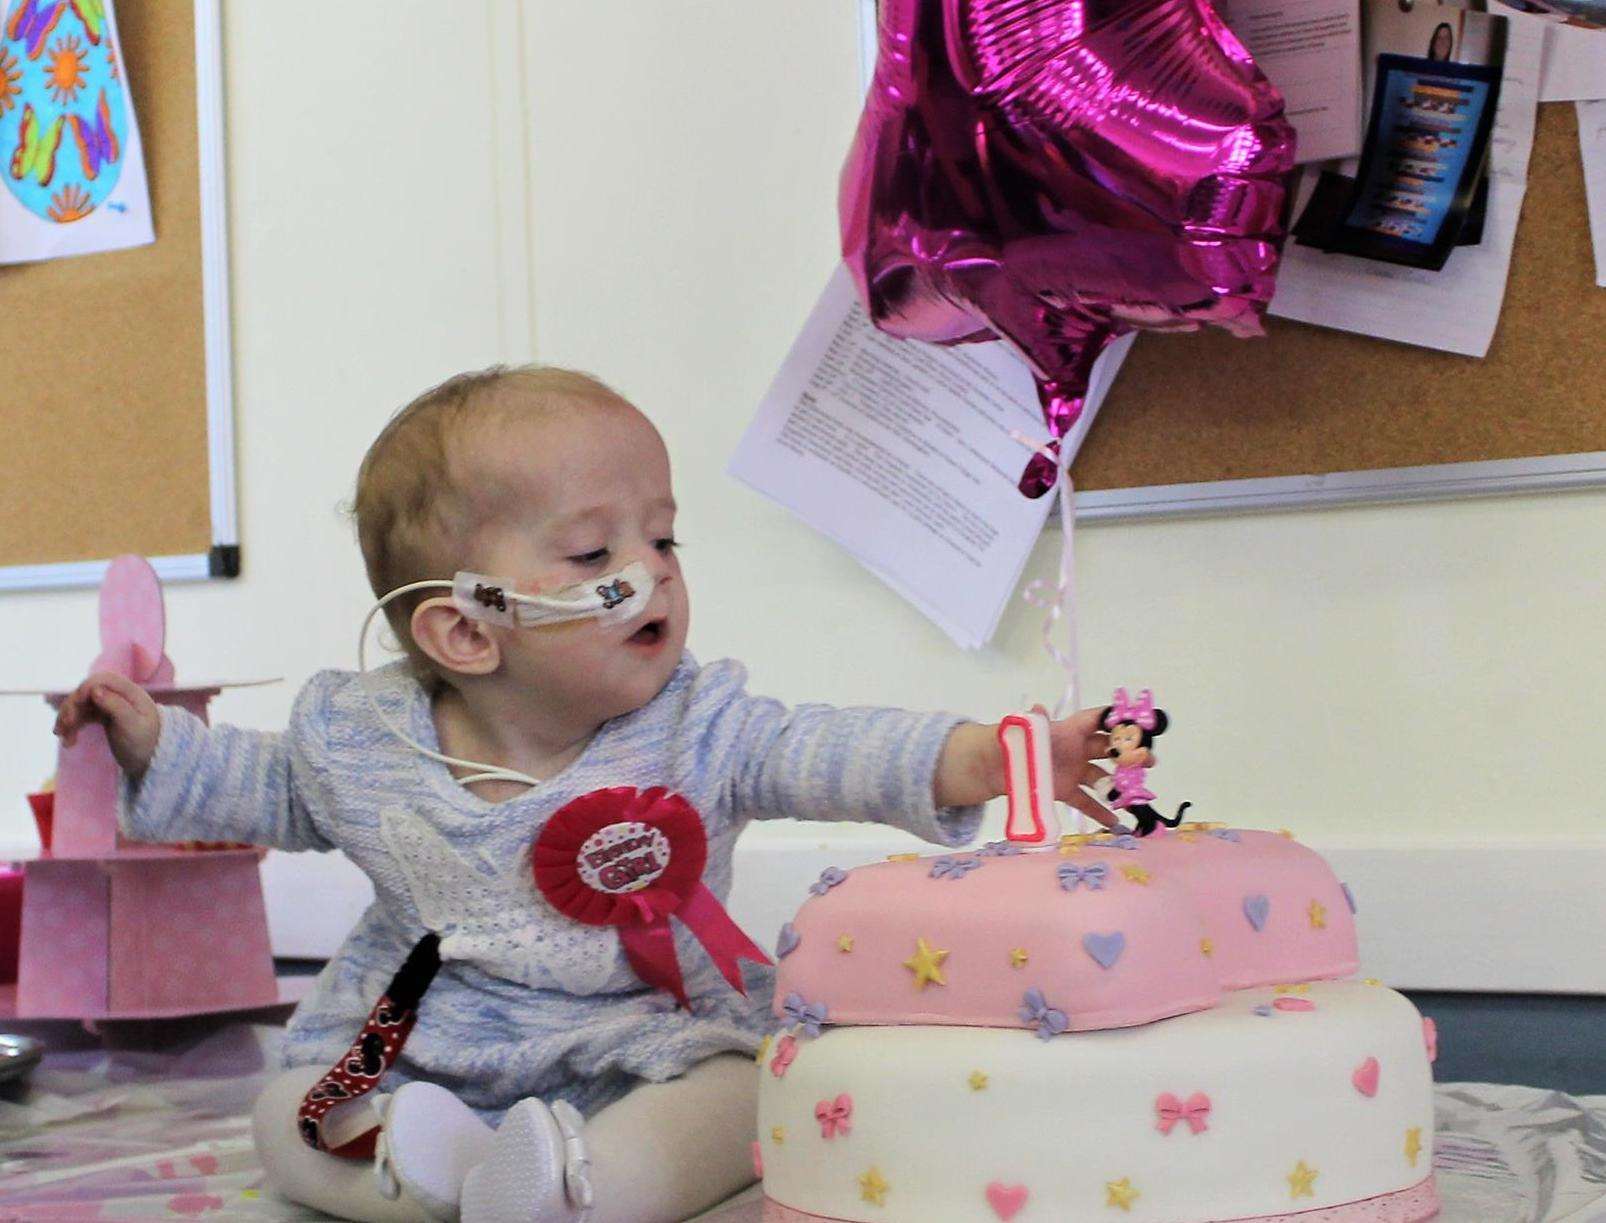 Natalie-Rose Denney-Hook has had three operations called off to replace a feeding tube